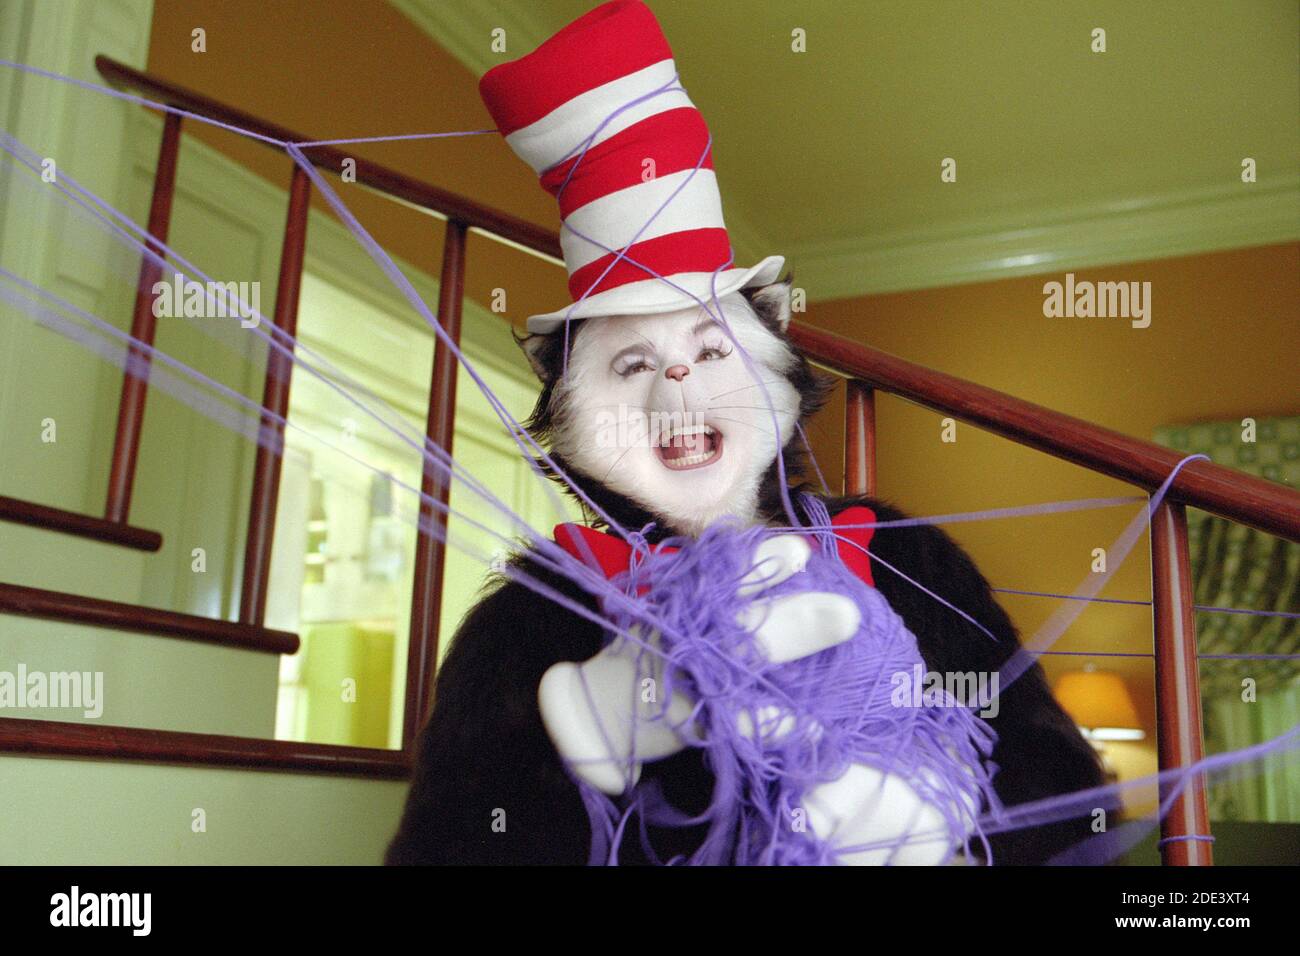 Mike Myers, 'The Cat In The Hat' (2003)  Photo credit: Melinda Sue Gordon/Universal/The Hollywood Archive / File Reference # 34078-0525FSTHA Stock Photo